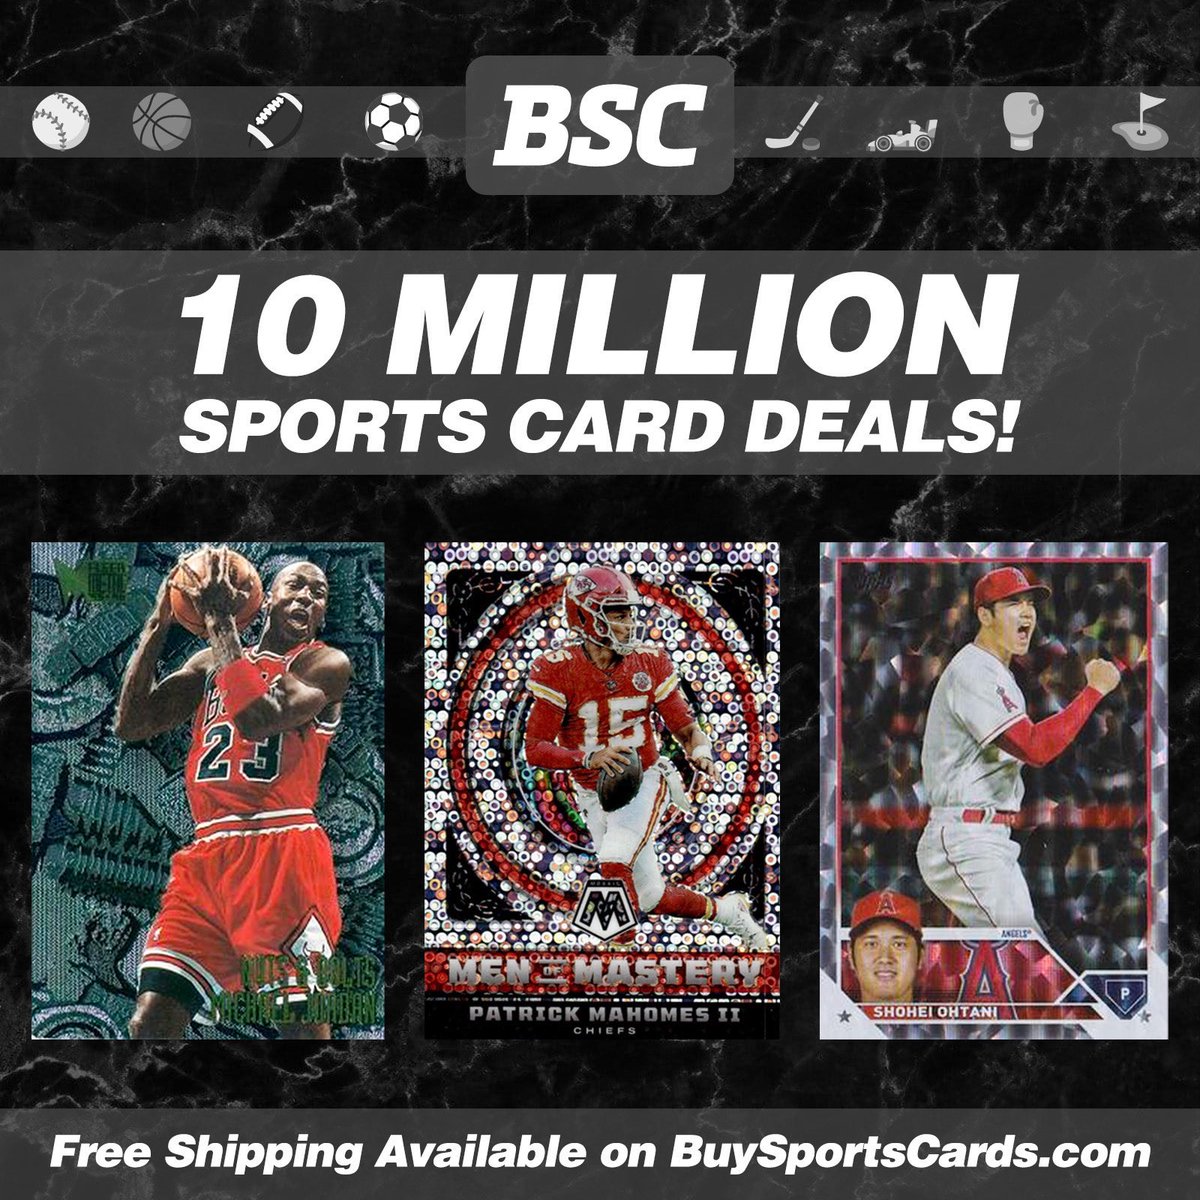 Discover thousands of new deals listed every hour on BuySportsCards.com 🤯 #TheHobby #SportsCards